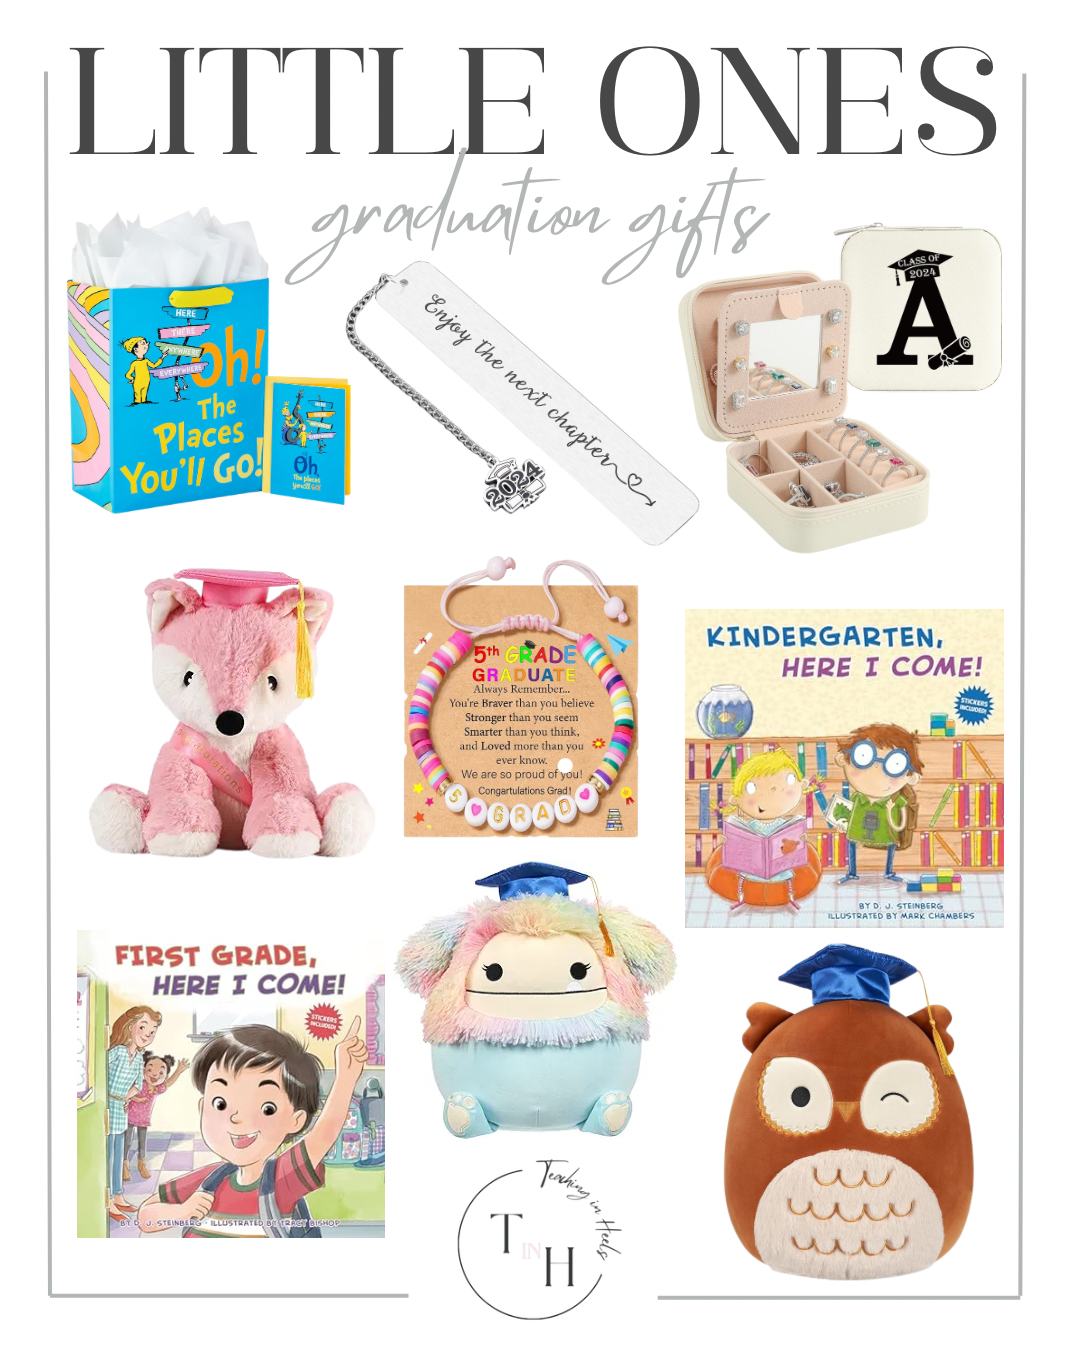 The Ultimate Graduation Gift Guide 2024

Graduation, graduation gifts, gift guide, gifts, grad gifts, seasonal gifts, elementary school, kids gifts, toys